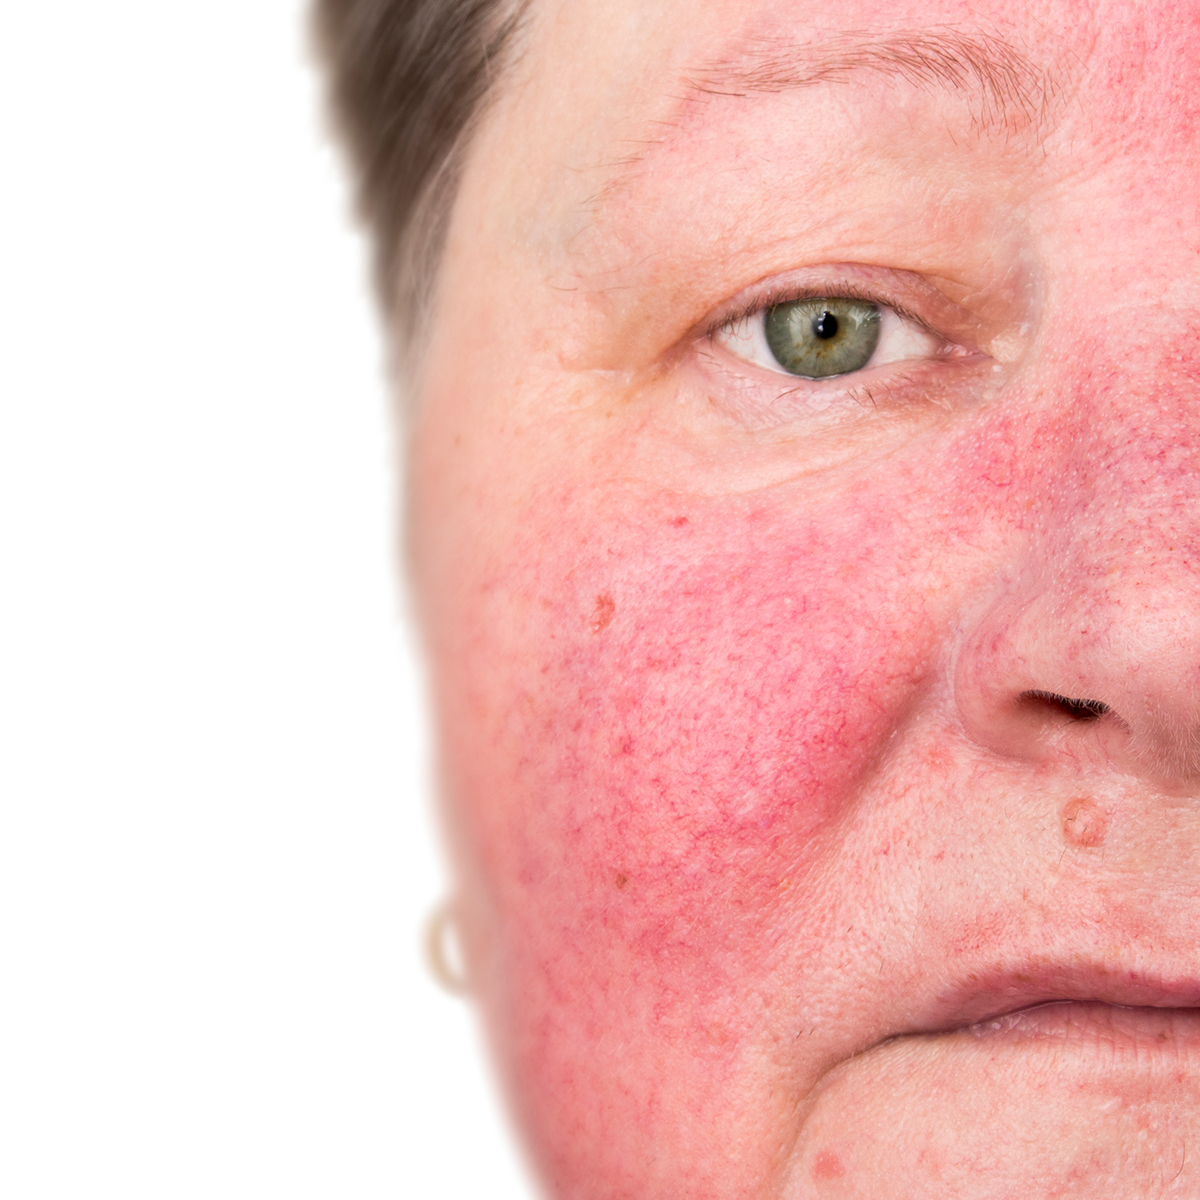 Is Rosacea Acne?